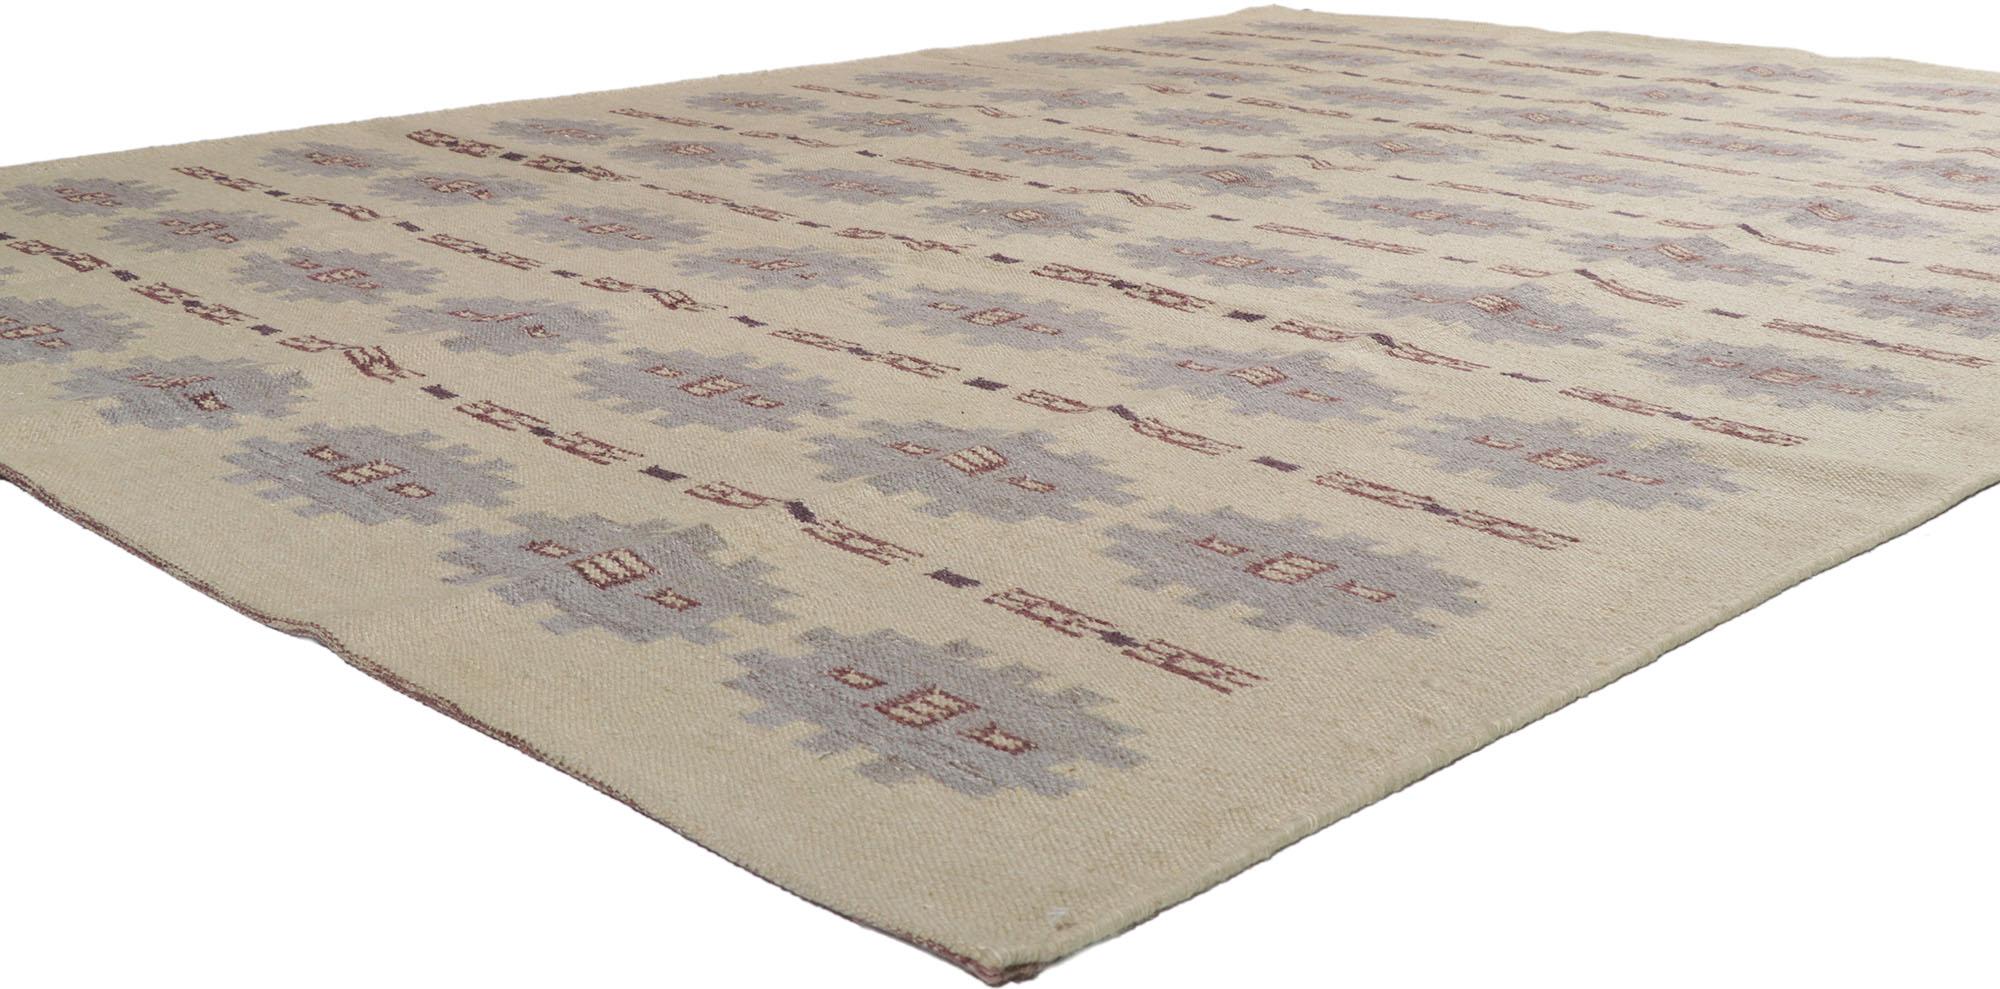 30677 New Swedish Inspired Kilim rug with Scandinavian Modern Style 08'09 x 11'06. With its geometric design and bohemian hygge vibes, this hand-woven wool Swedish Kilim rug beautifully embodies the simplicity of Scandinavian modern style. The